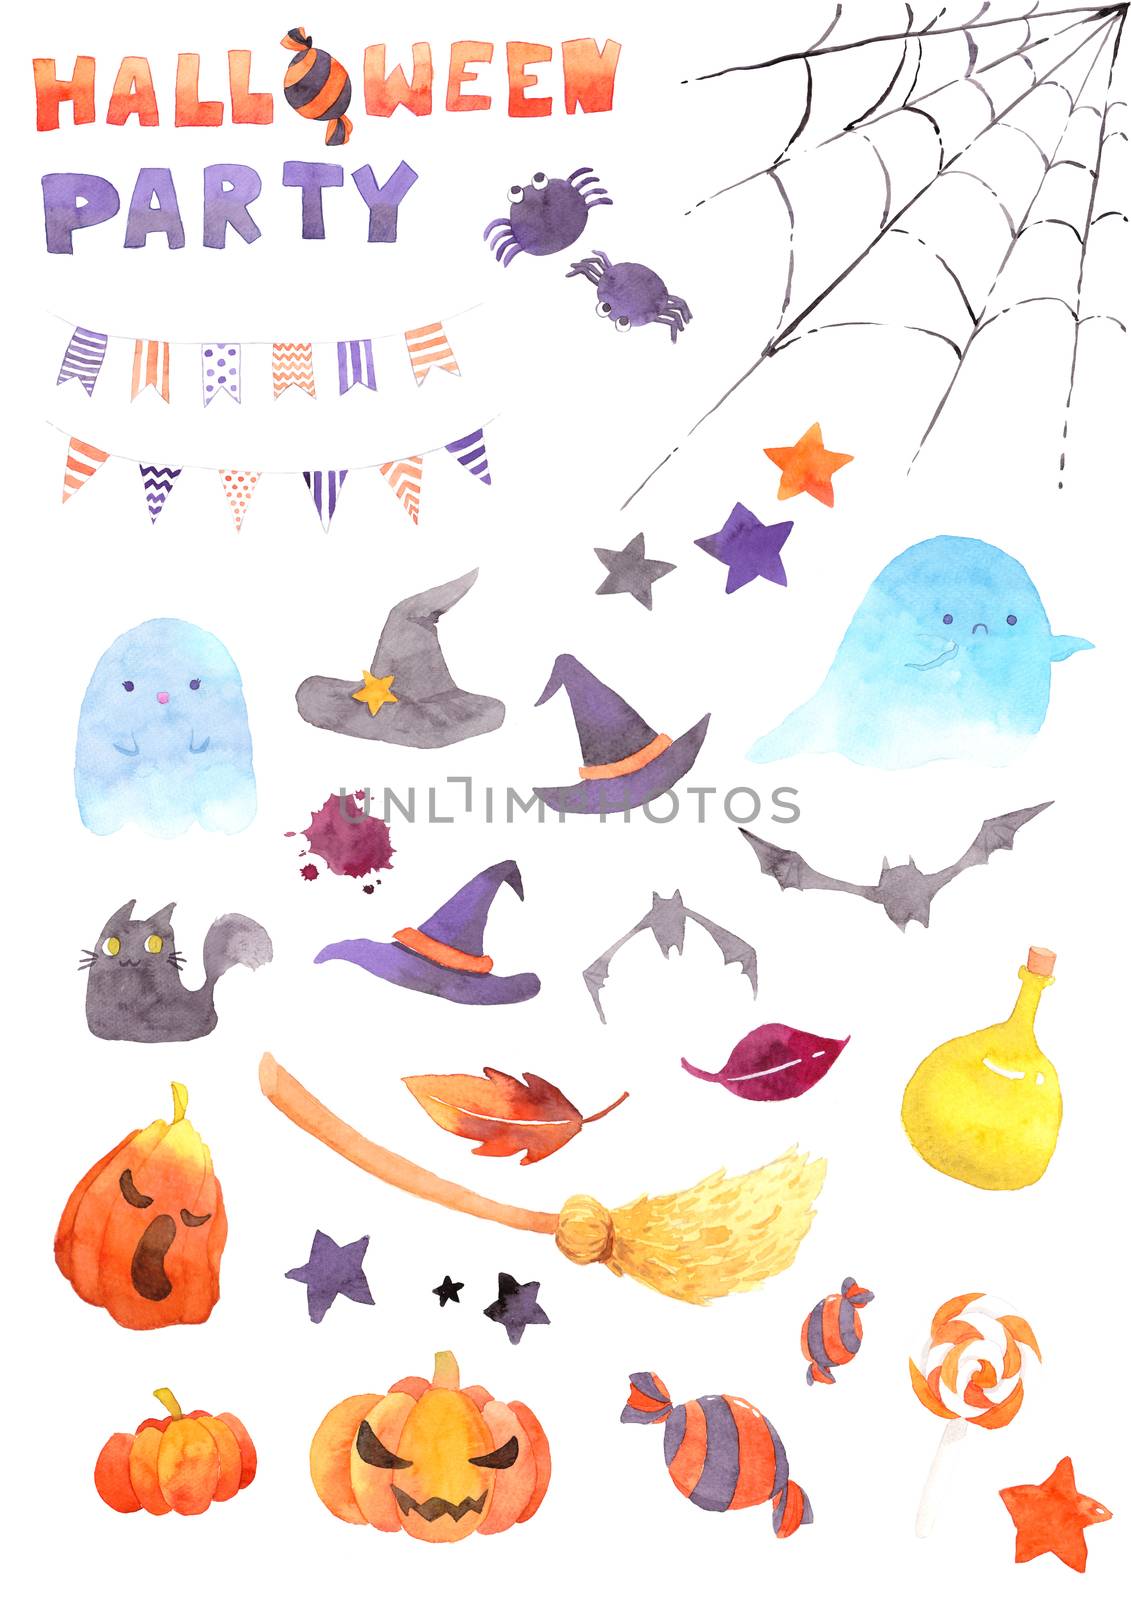 Watercolor Halloween Illustration Set. Funny Cute cartoon baby character, ghost spirit, spider, cobweb, Magic hat, sweets, stars, pumpkin, flag, bat, cat, leave, jack, good for holiday design by Ungamrung